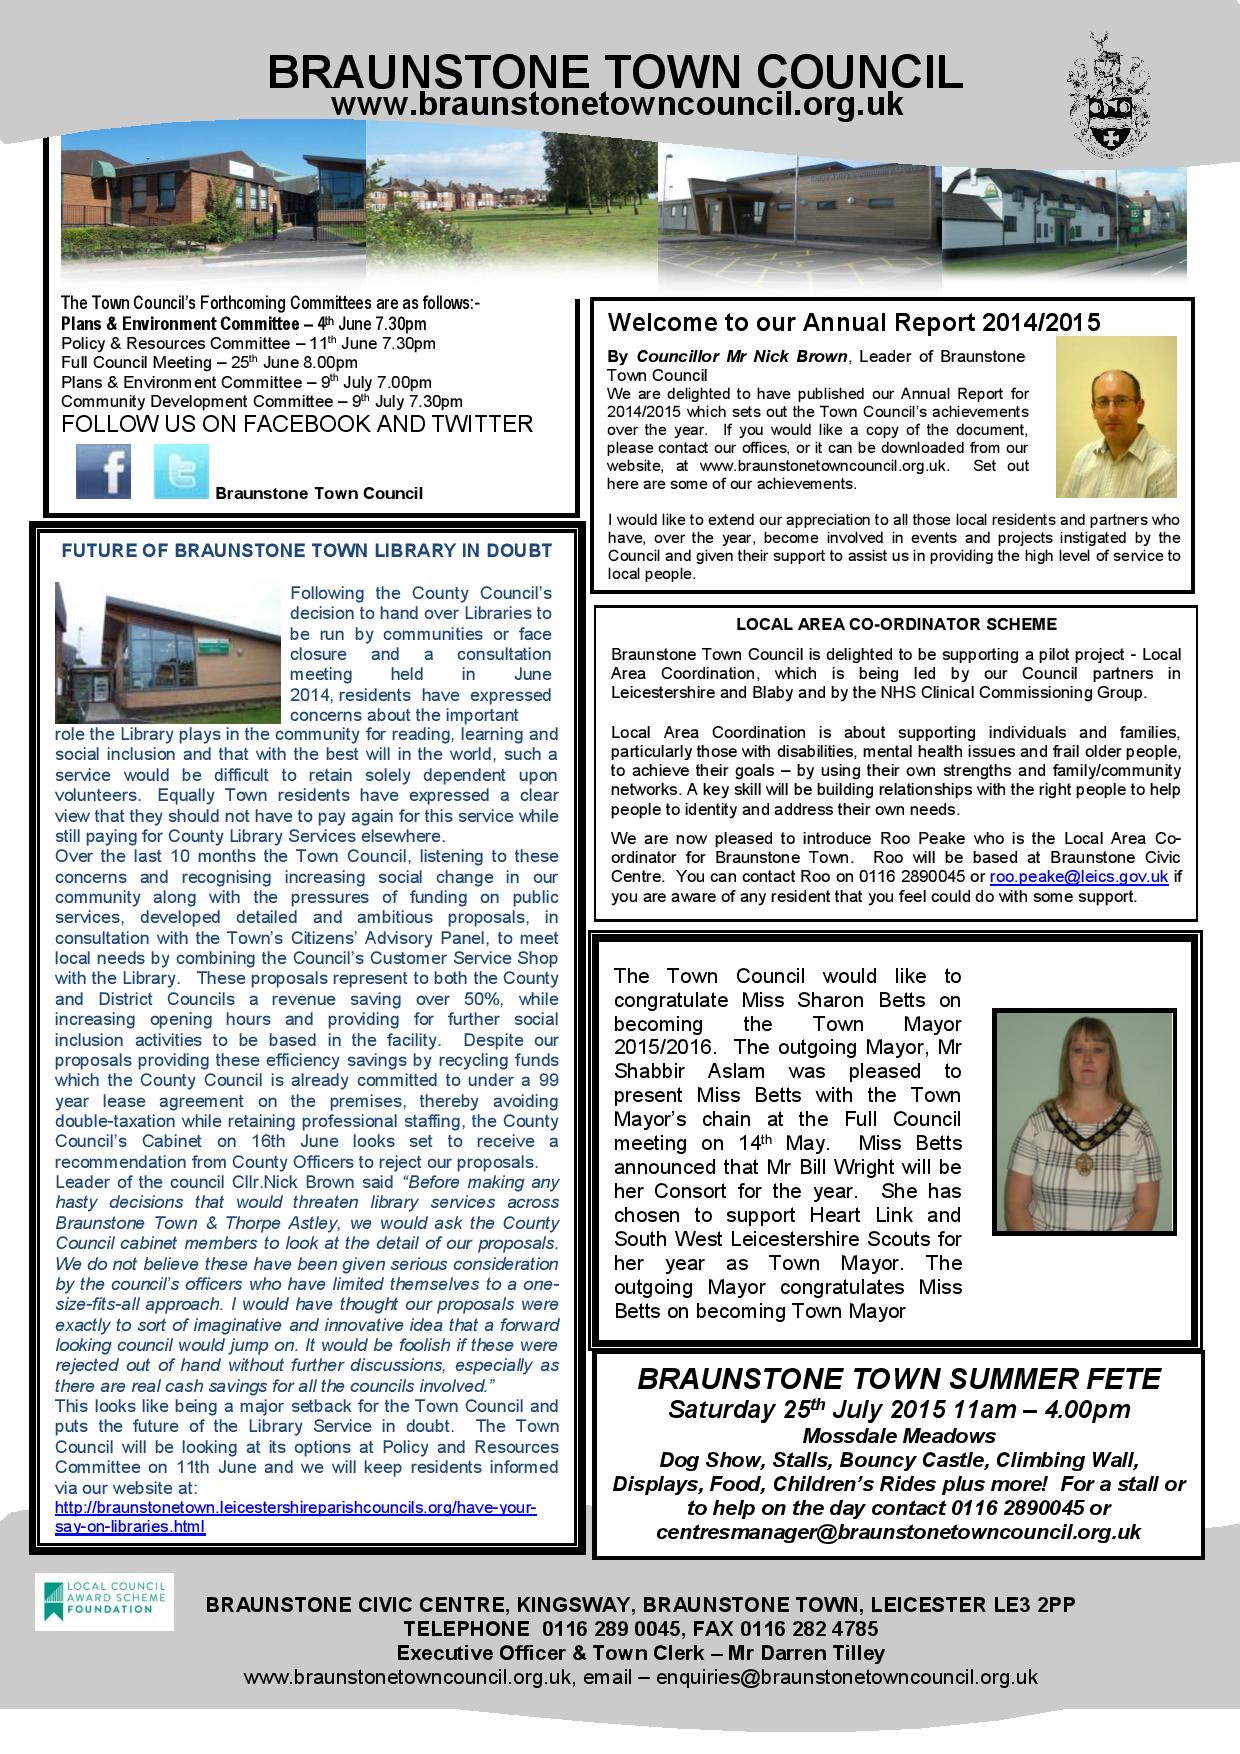 The Town Council article from the June 2015 issue of the Braunstone Life